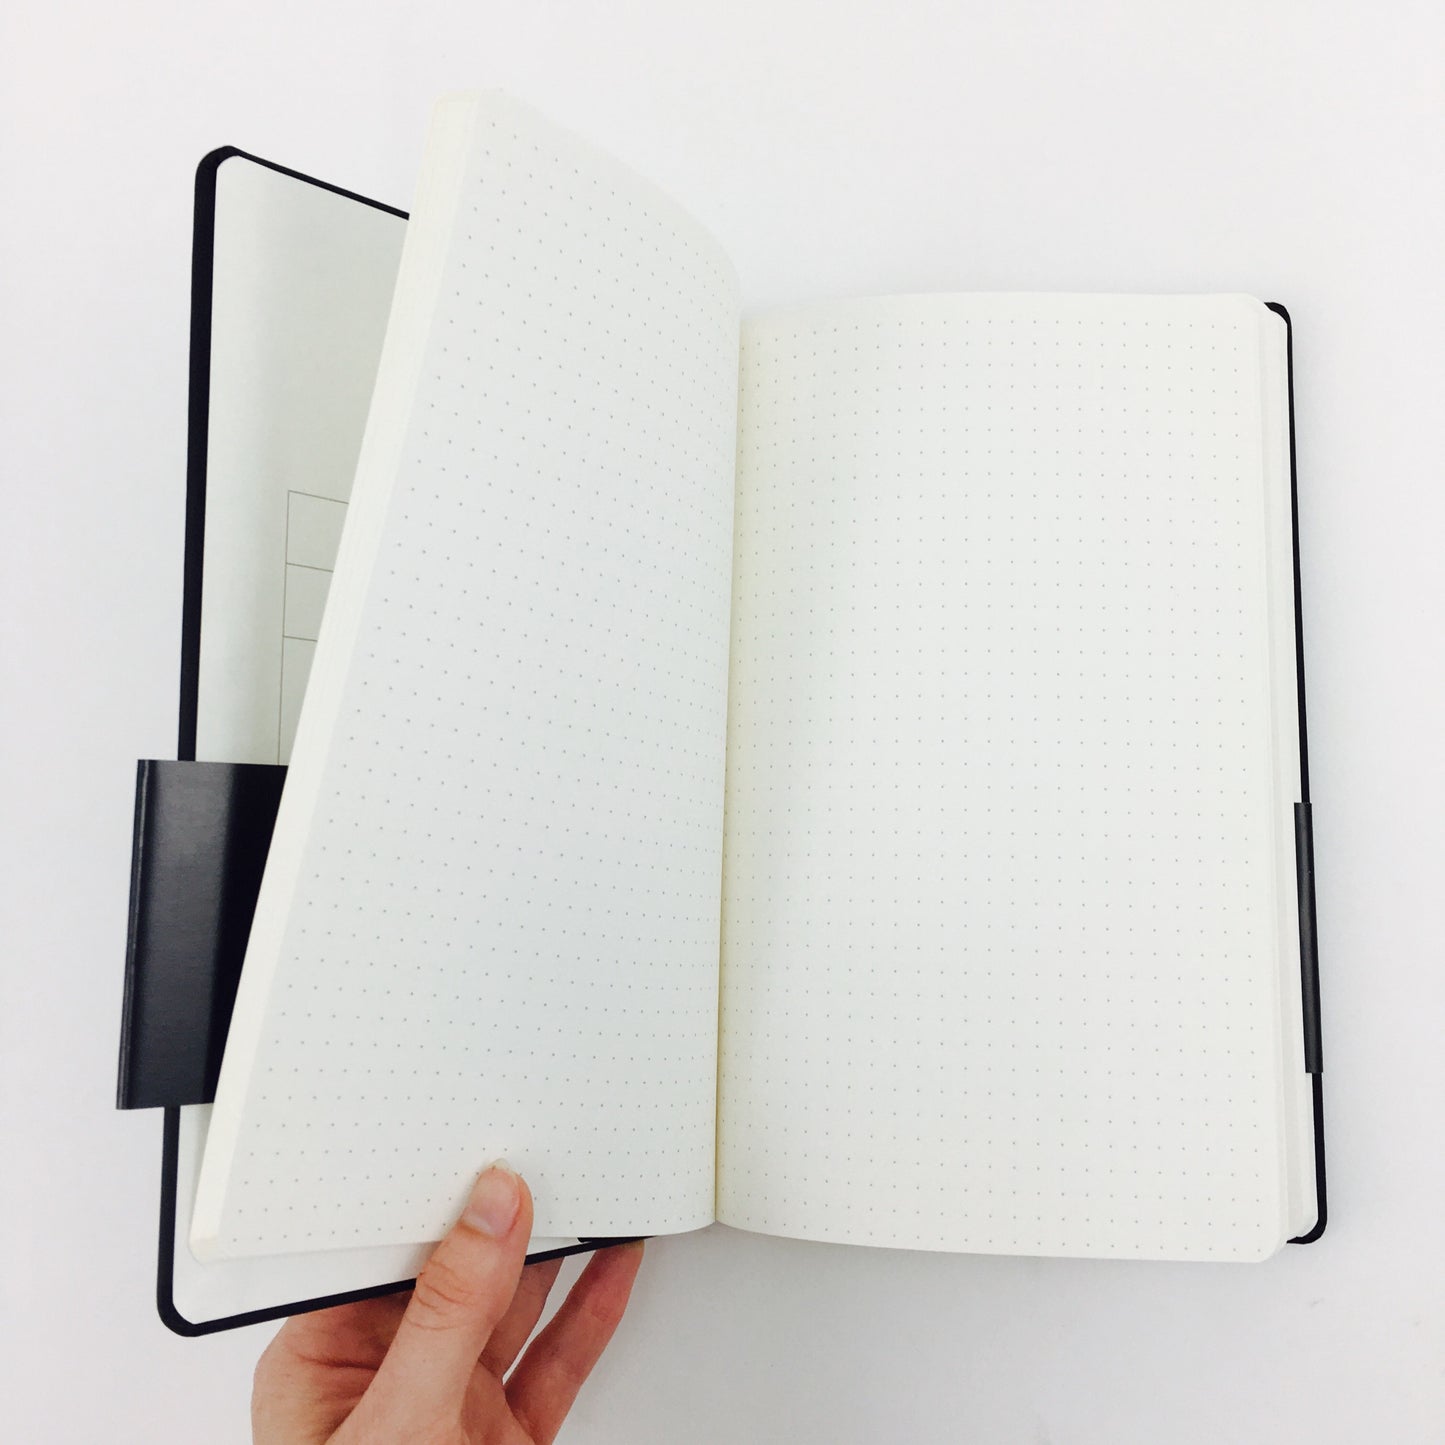 Blackwing Slate Travel Notebook with Original Pencil - Dot Grid by Blackwing - K. A. Artist Shop